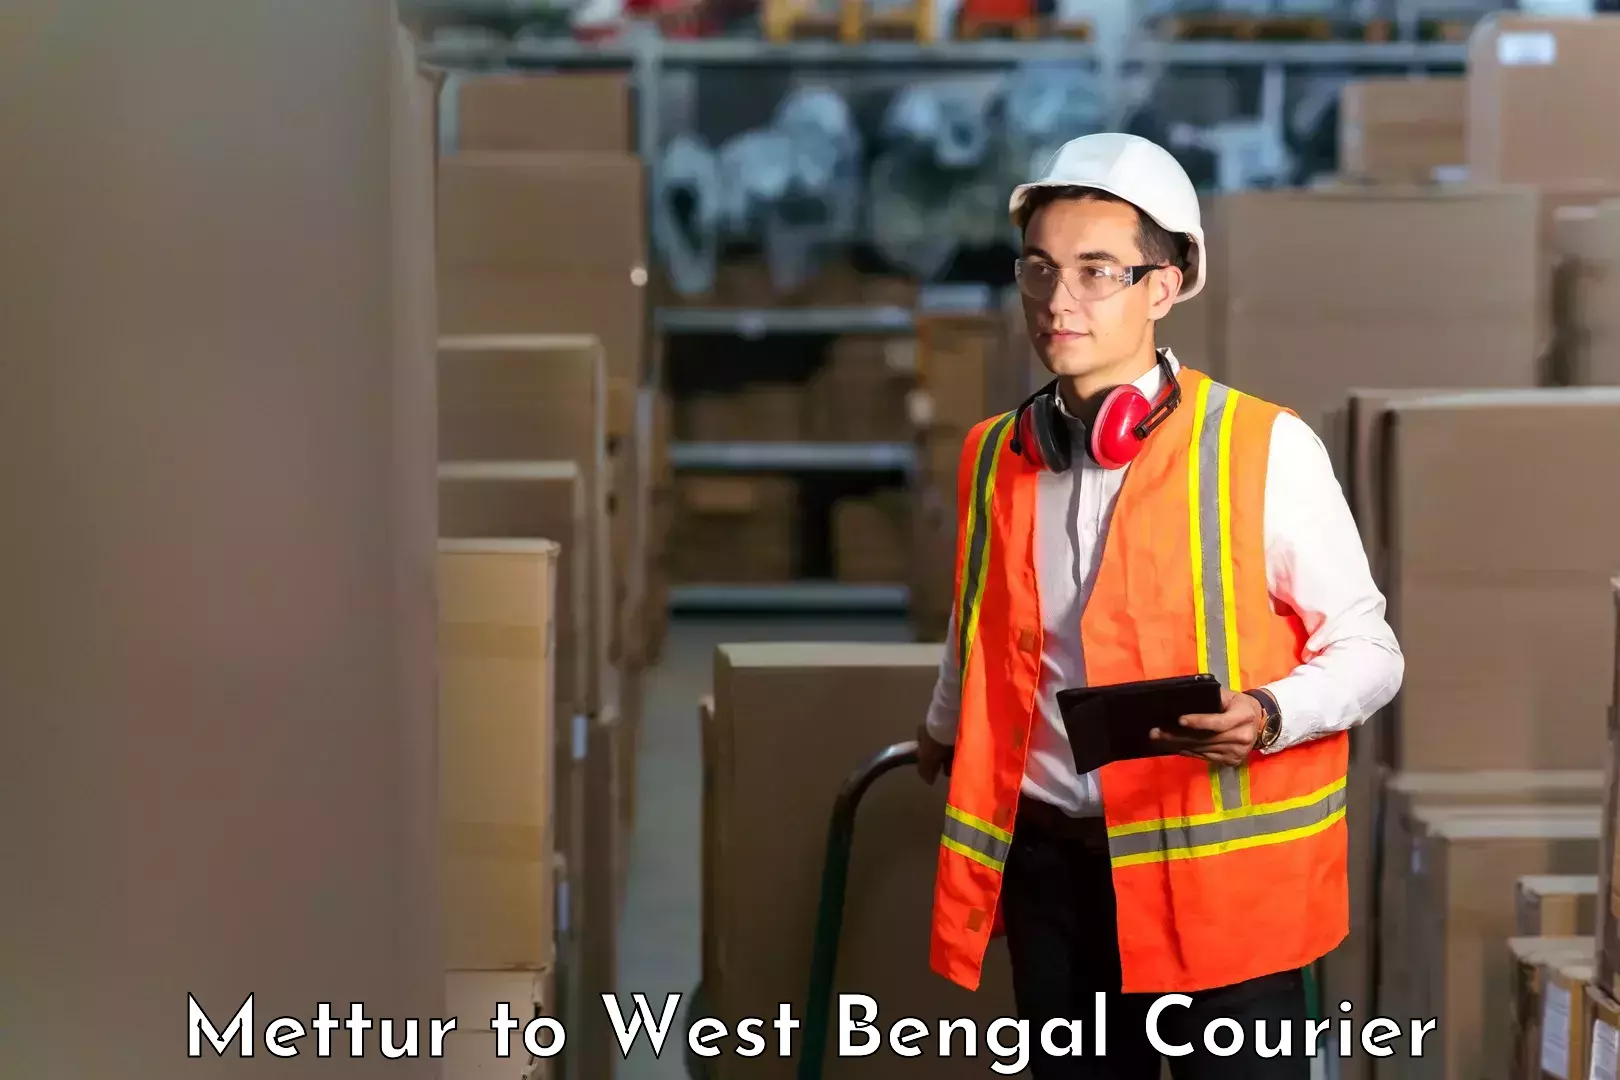 On-call courier service Mettur to West Bengal